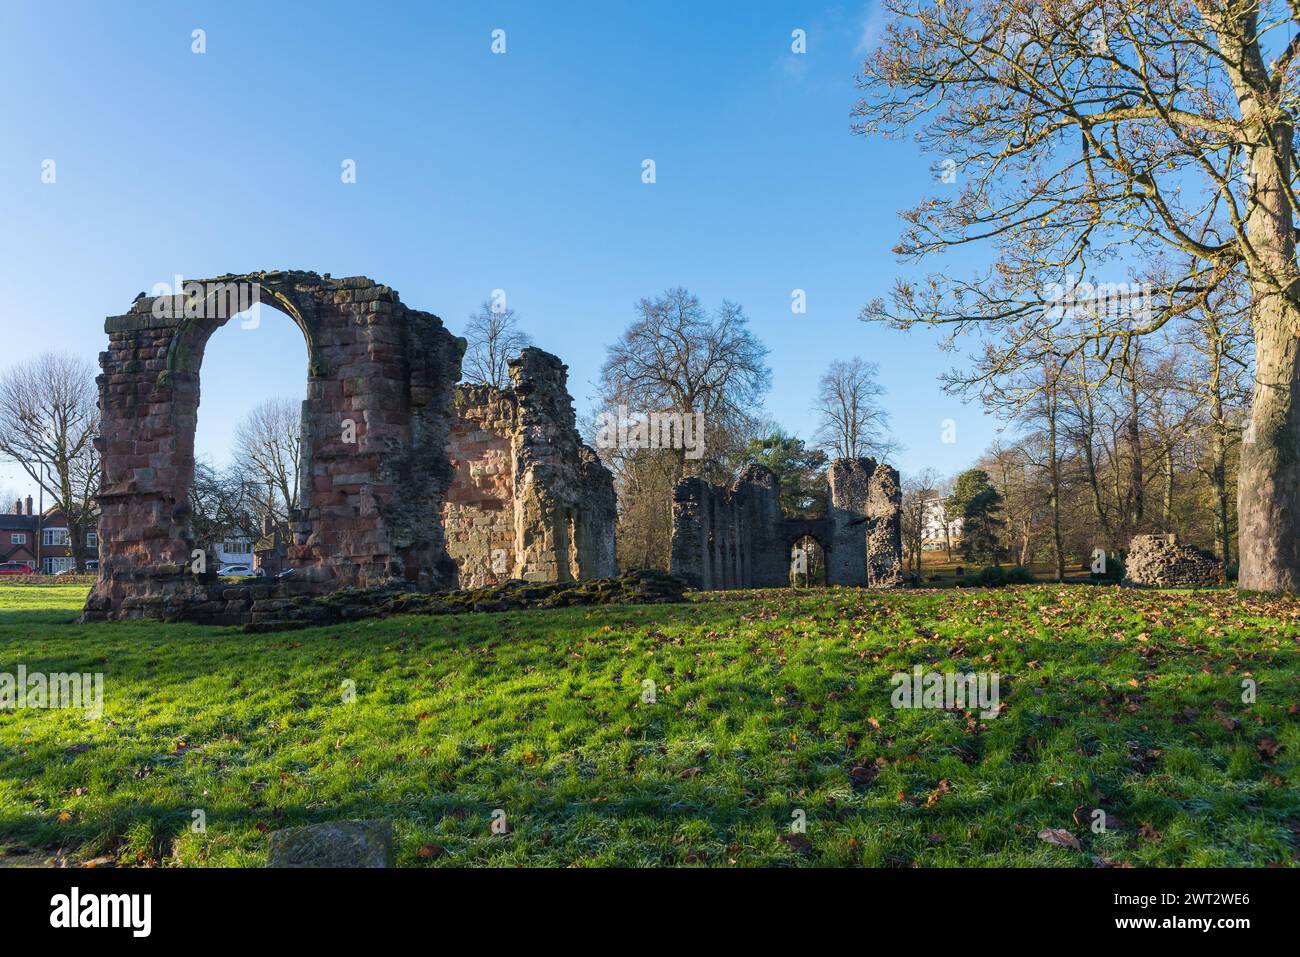 Priory Park, Dudley is home to the ruins of St James's Priory which is over 900 years old and grade 1 listed. Stock Photo